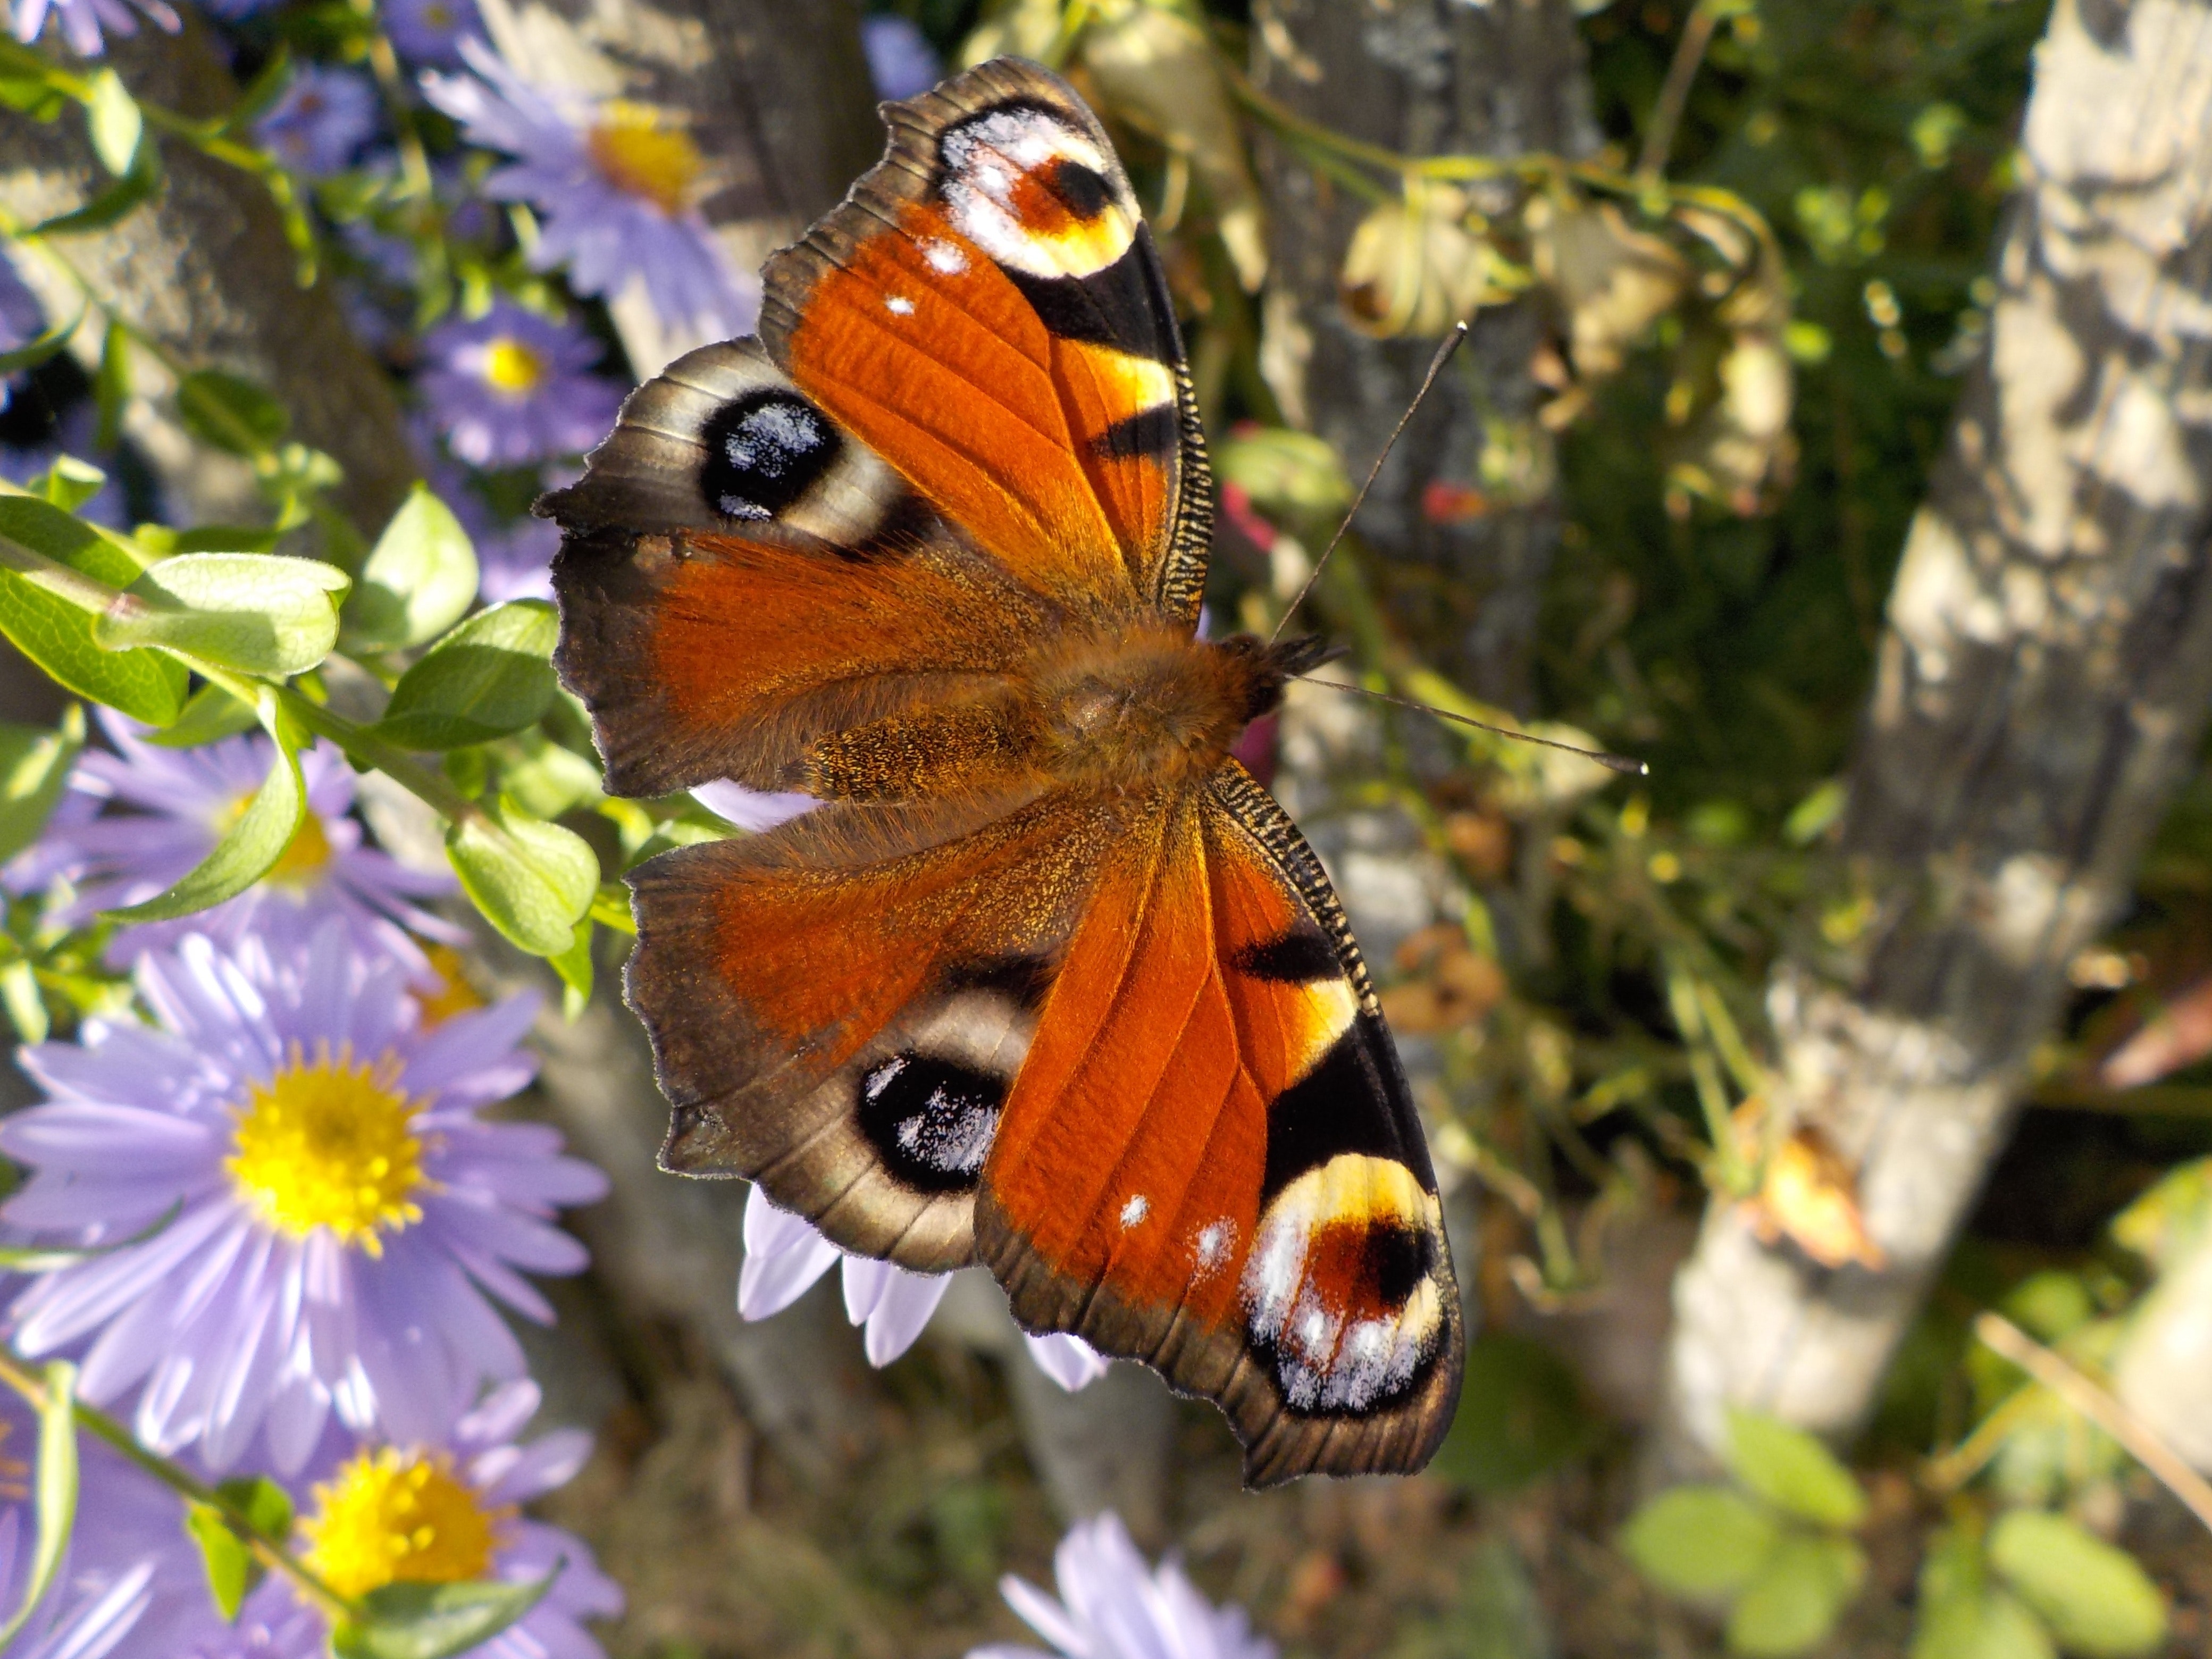 Orange White and Black Butterfly Perched on Flower, Butterfly, Flowers, Insect, Plants, HQ Photo